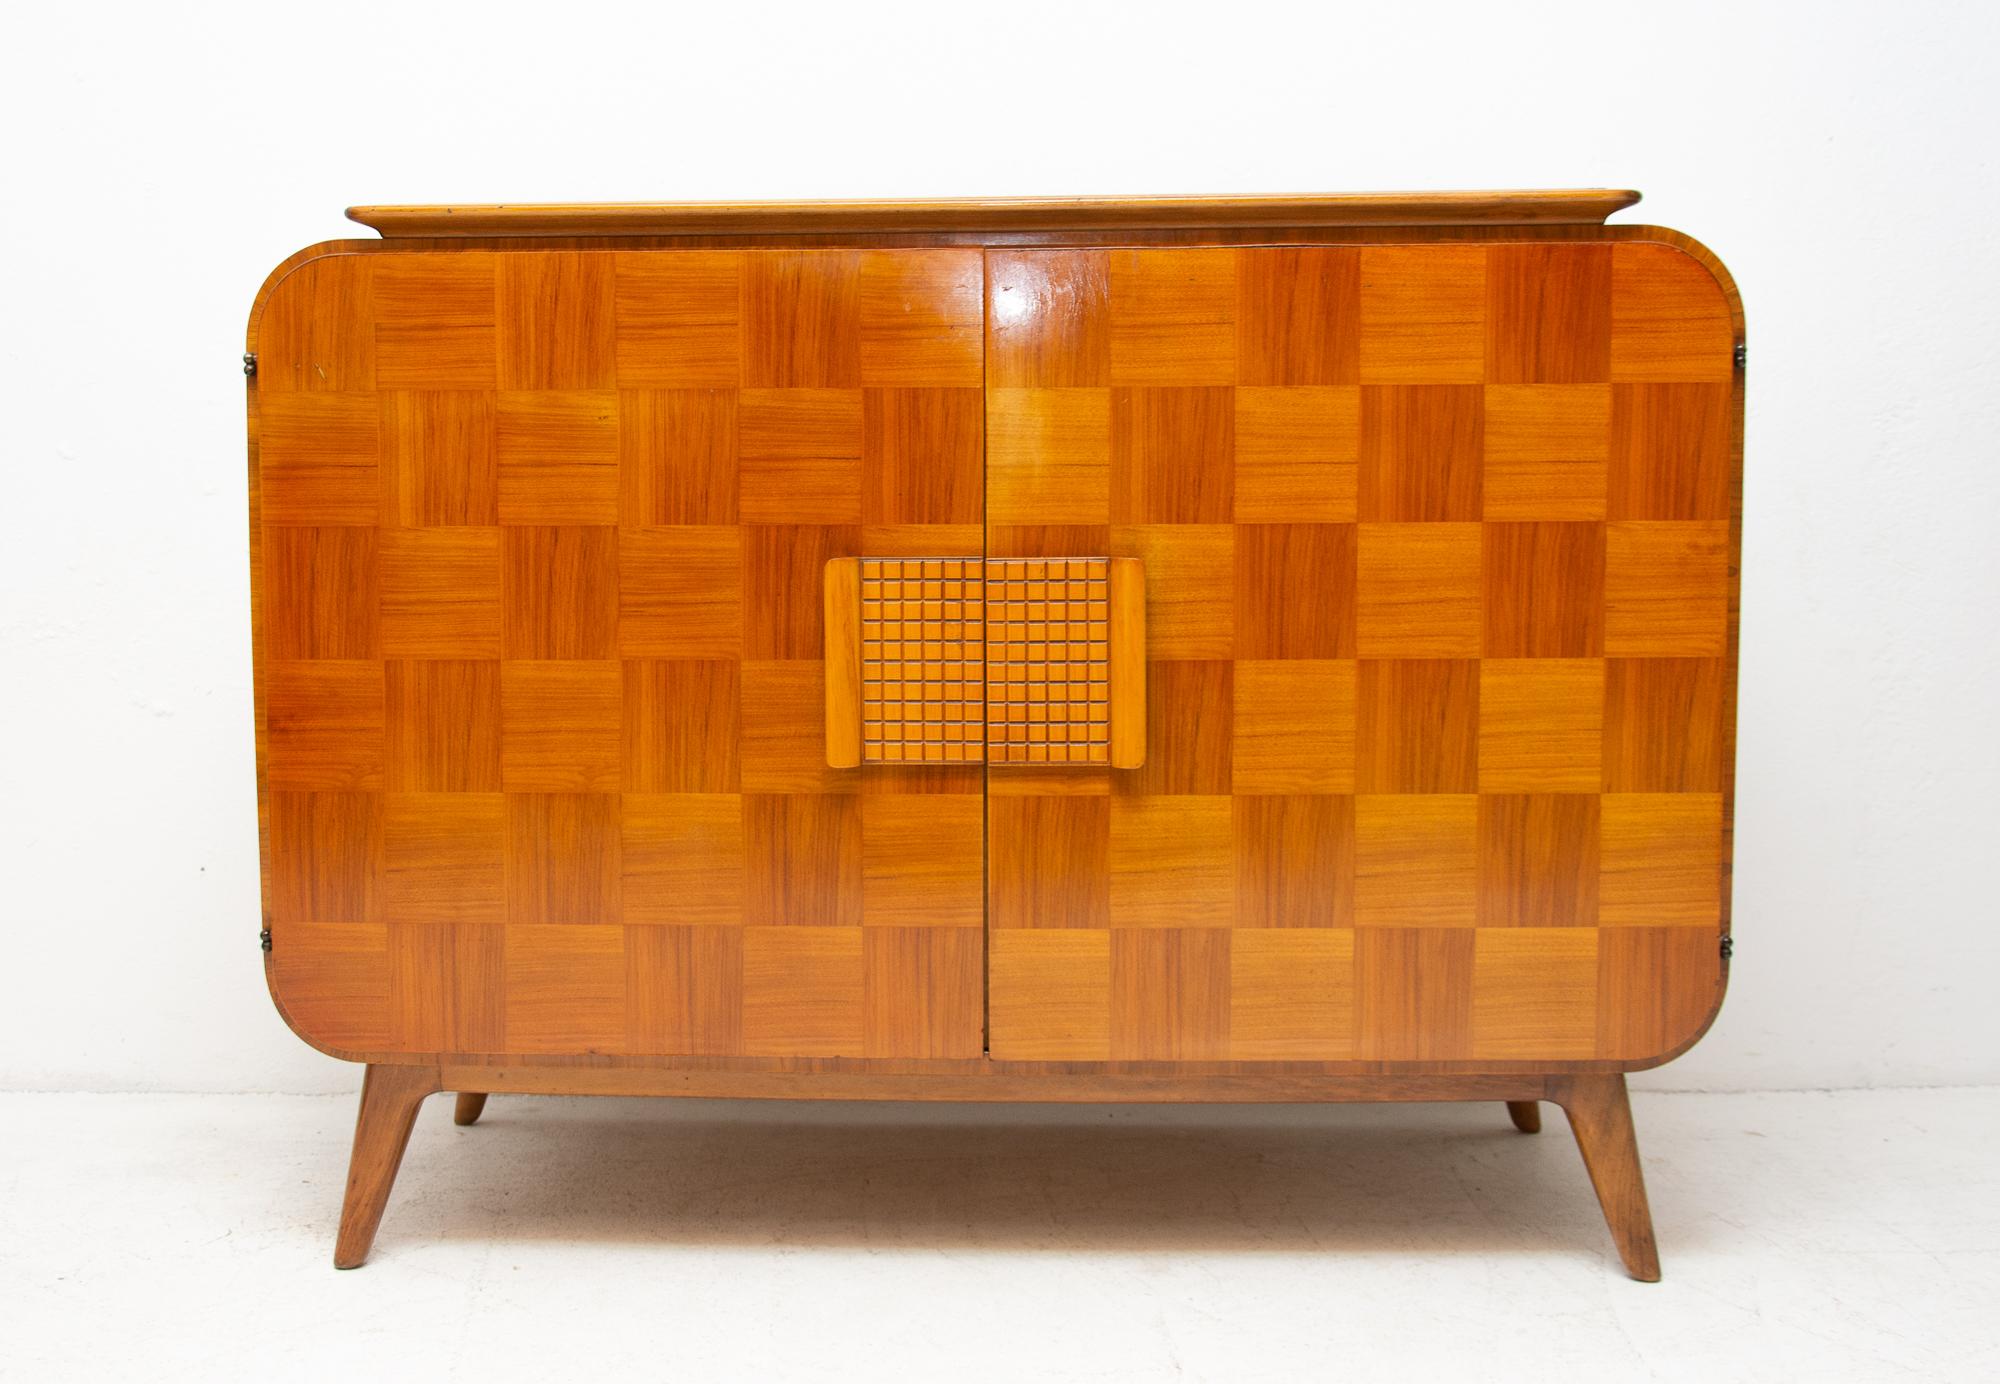 This midcentury sideboard was designed by world-renowned Czechoslovak architect Jindřich Halabala in 1947 and it was manufactured in UP Závody Brno in a limited edition for only two years since 1946.
This is an extremely successful piece of design.